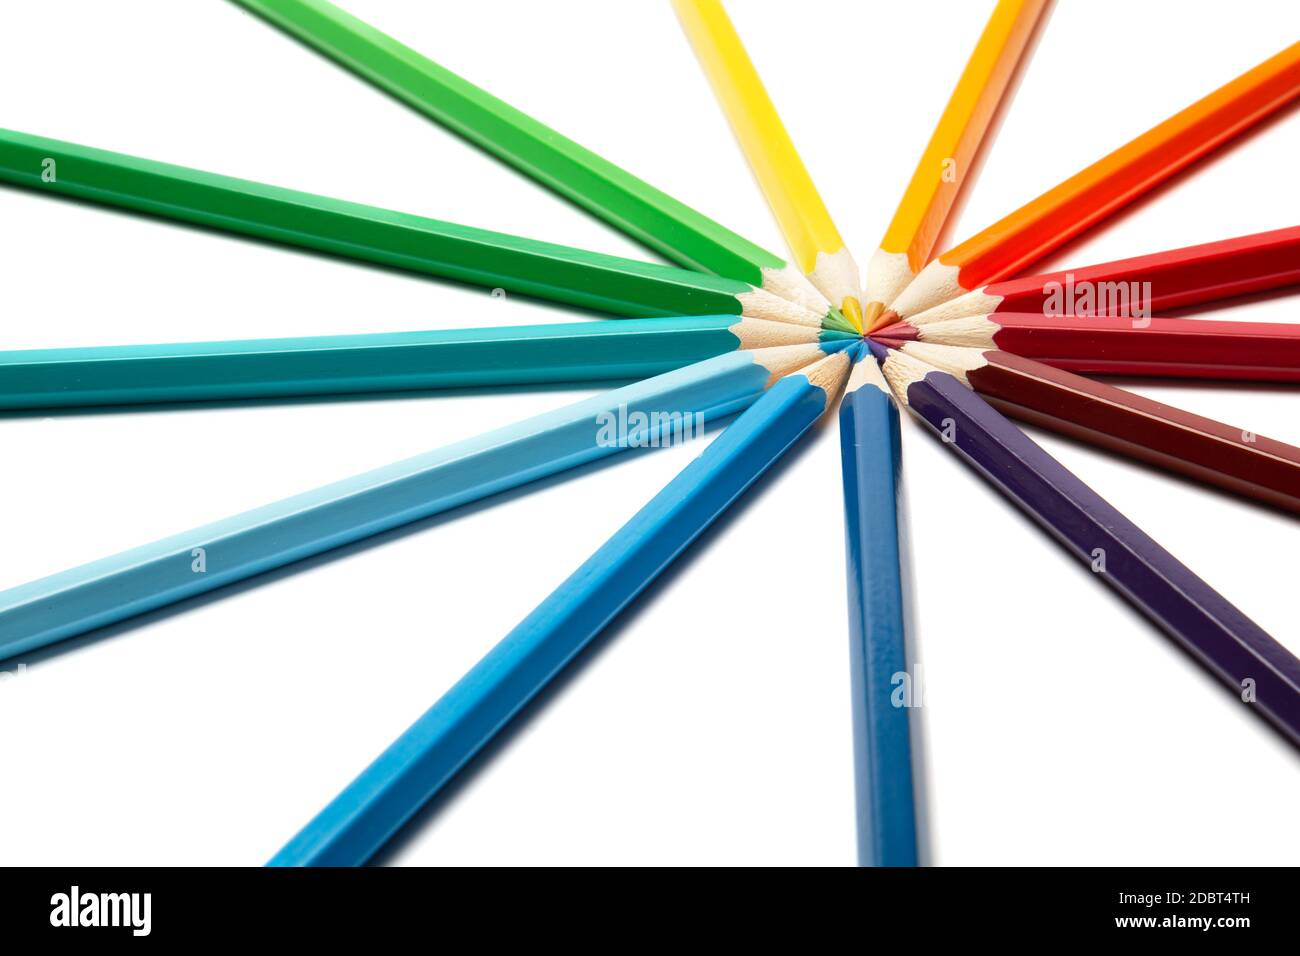 Lot of colorful wooden pencils on a white background Stock Photo